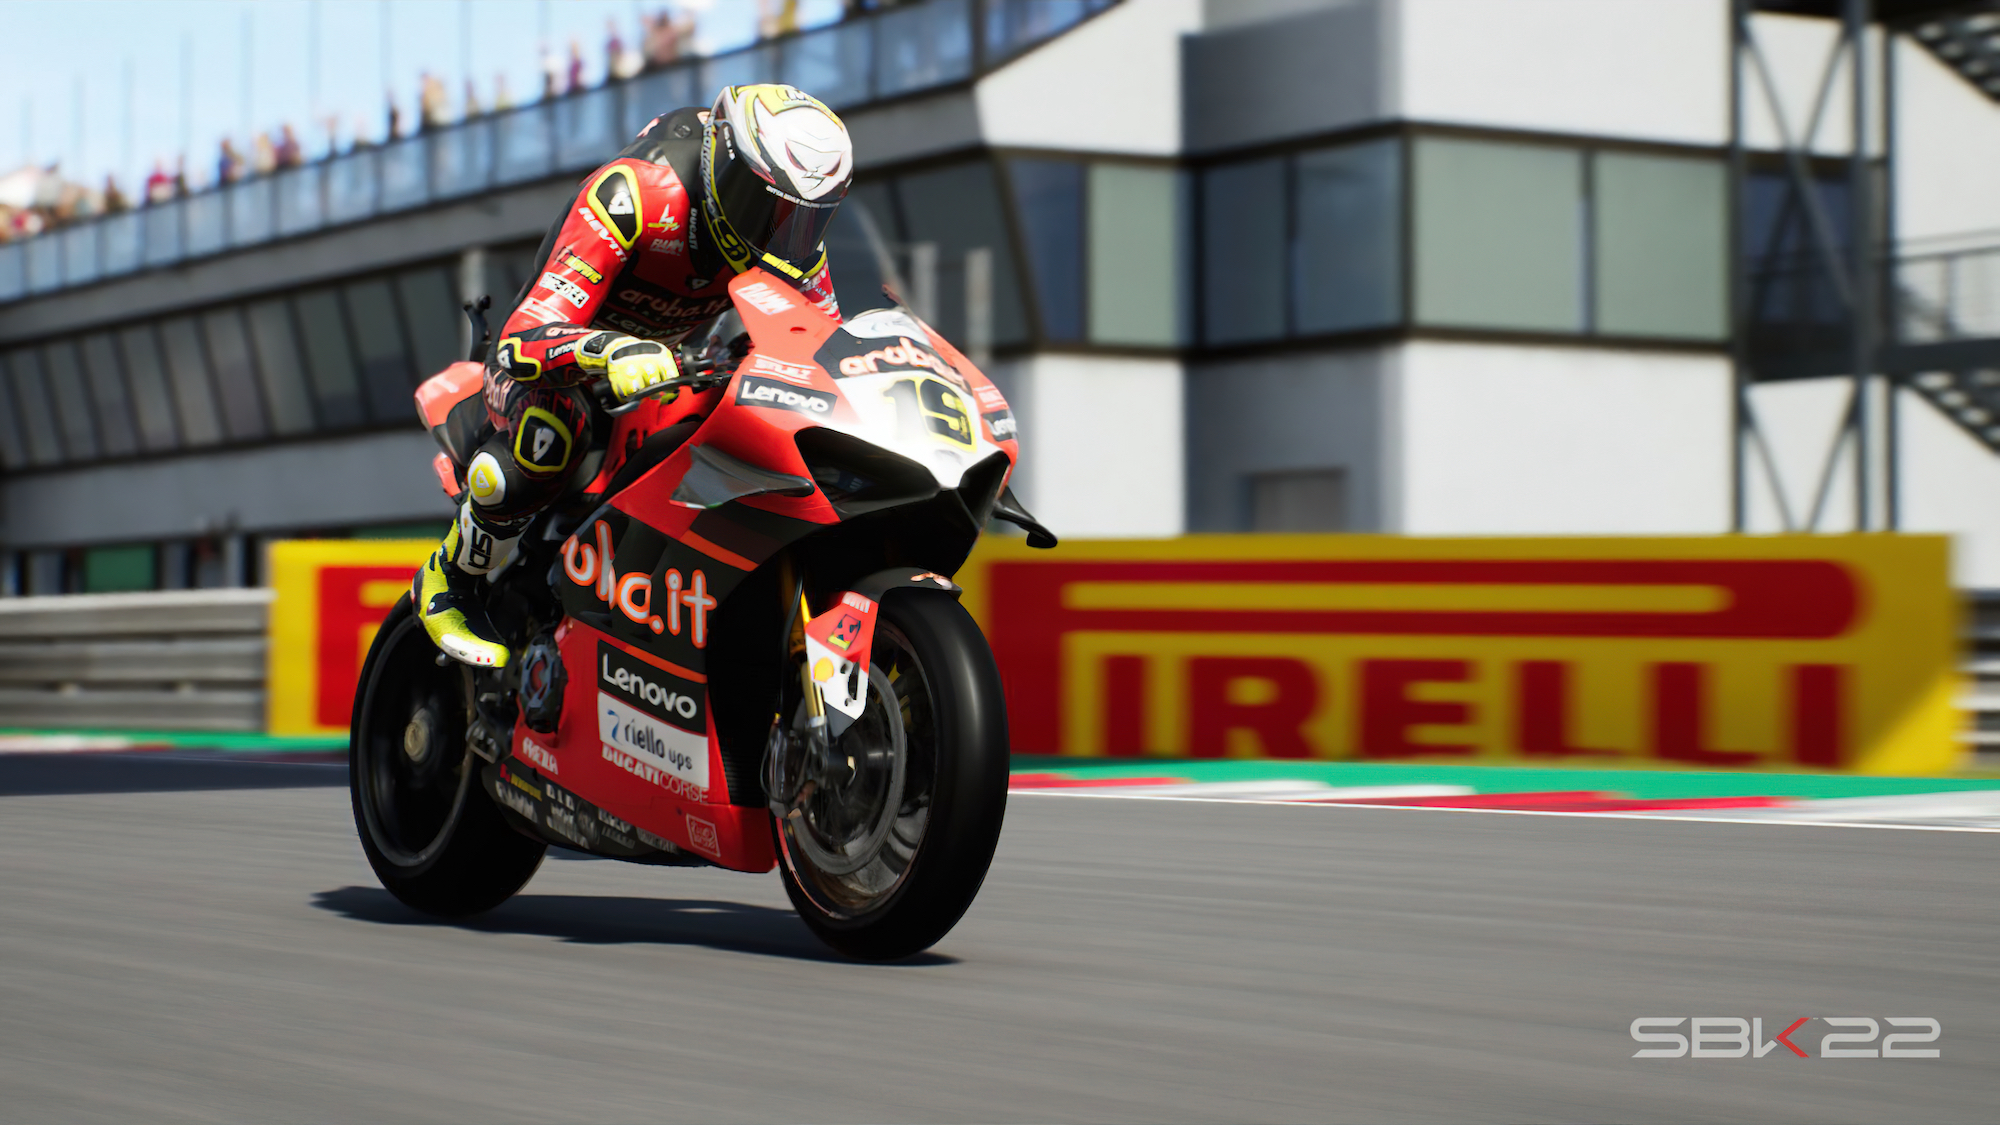 Pirelli tires are the slicks of choice for the all-new SBK™22 videogame. Media sourced from Pirelli's recent press release.